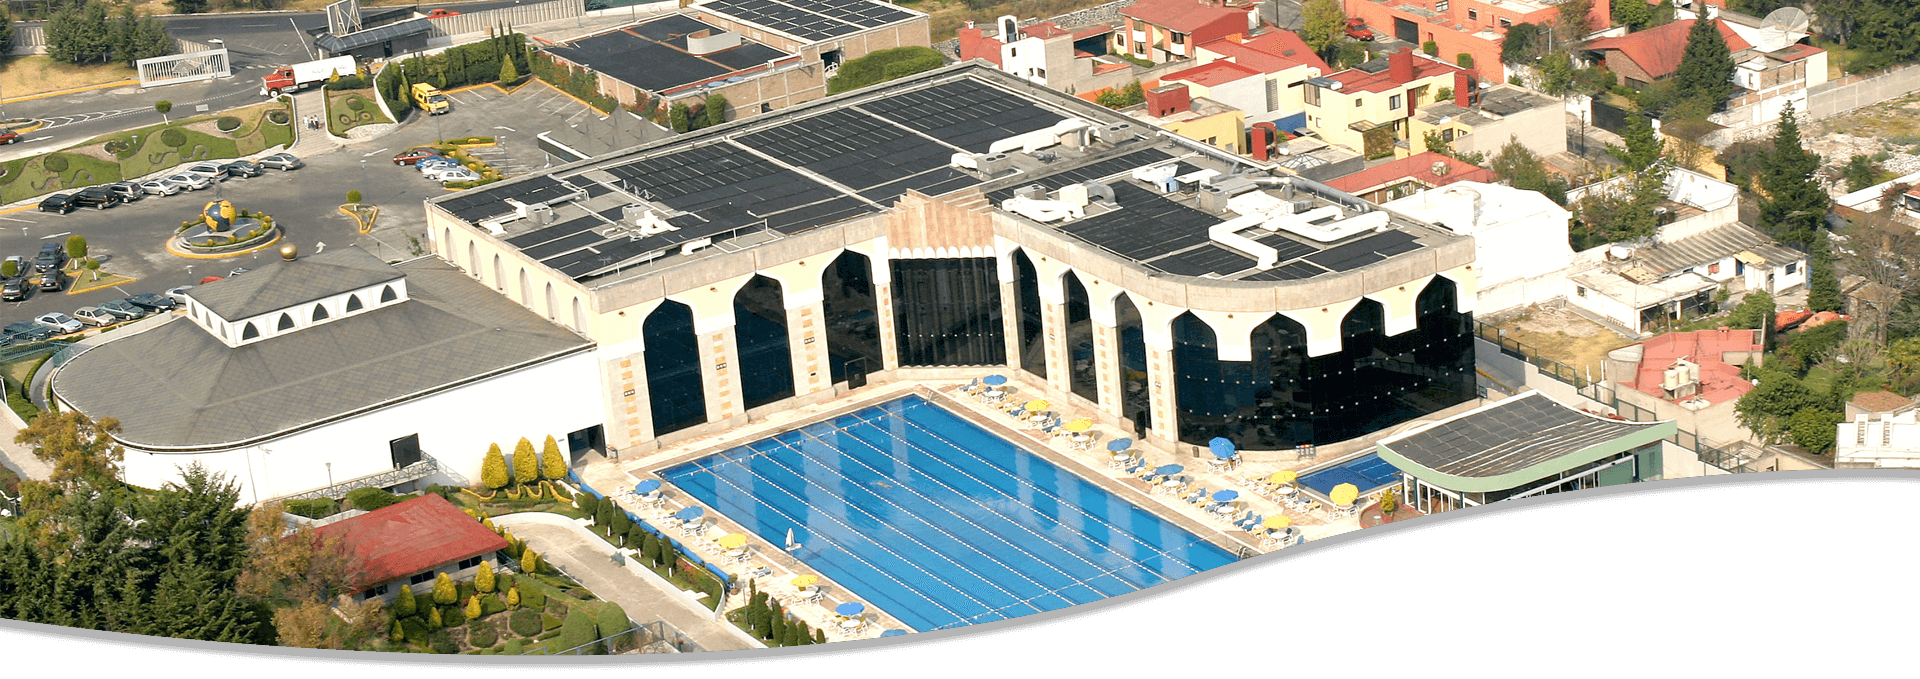 Solar Heating for Swimming Pools at Centro Libanes Mexico